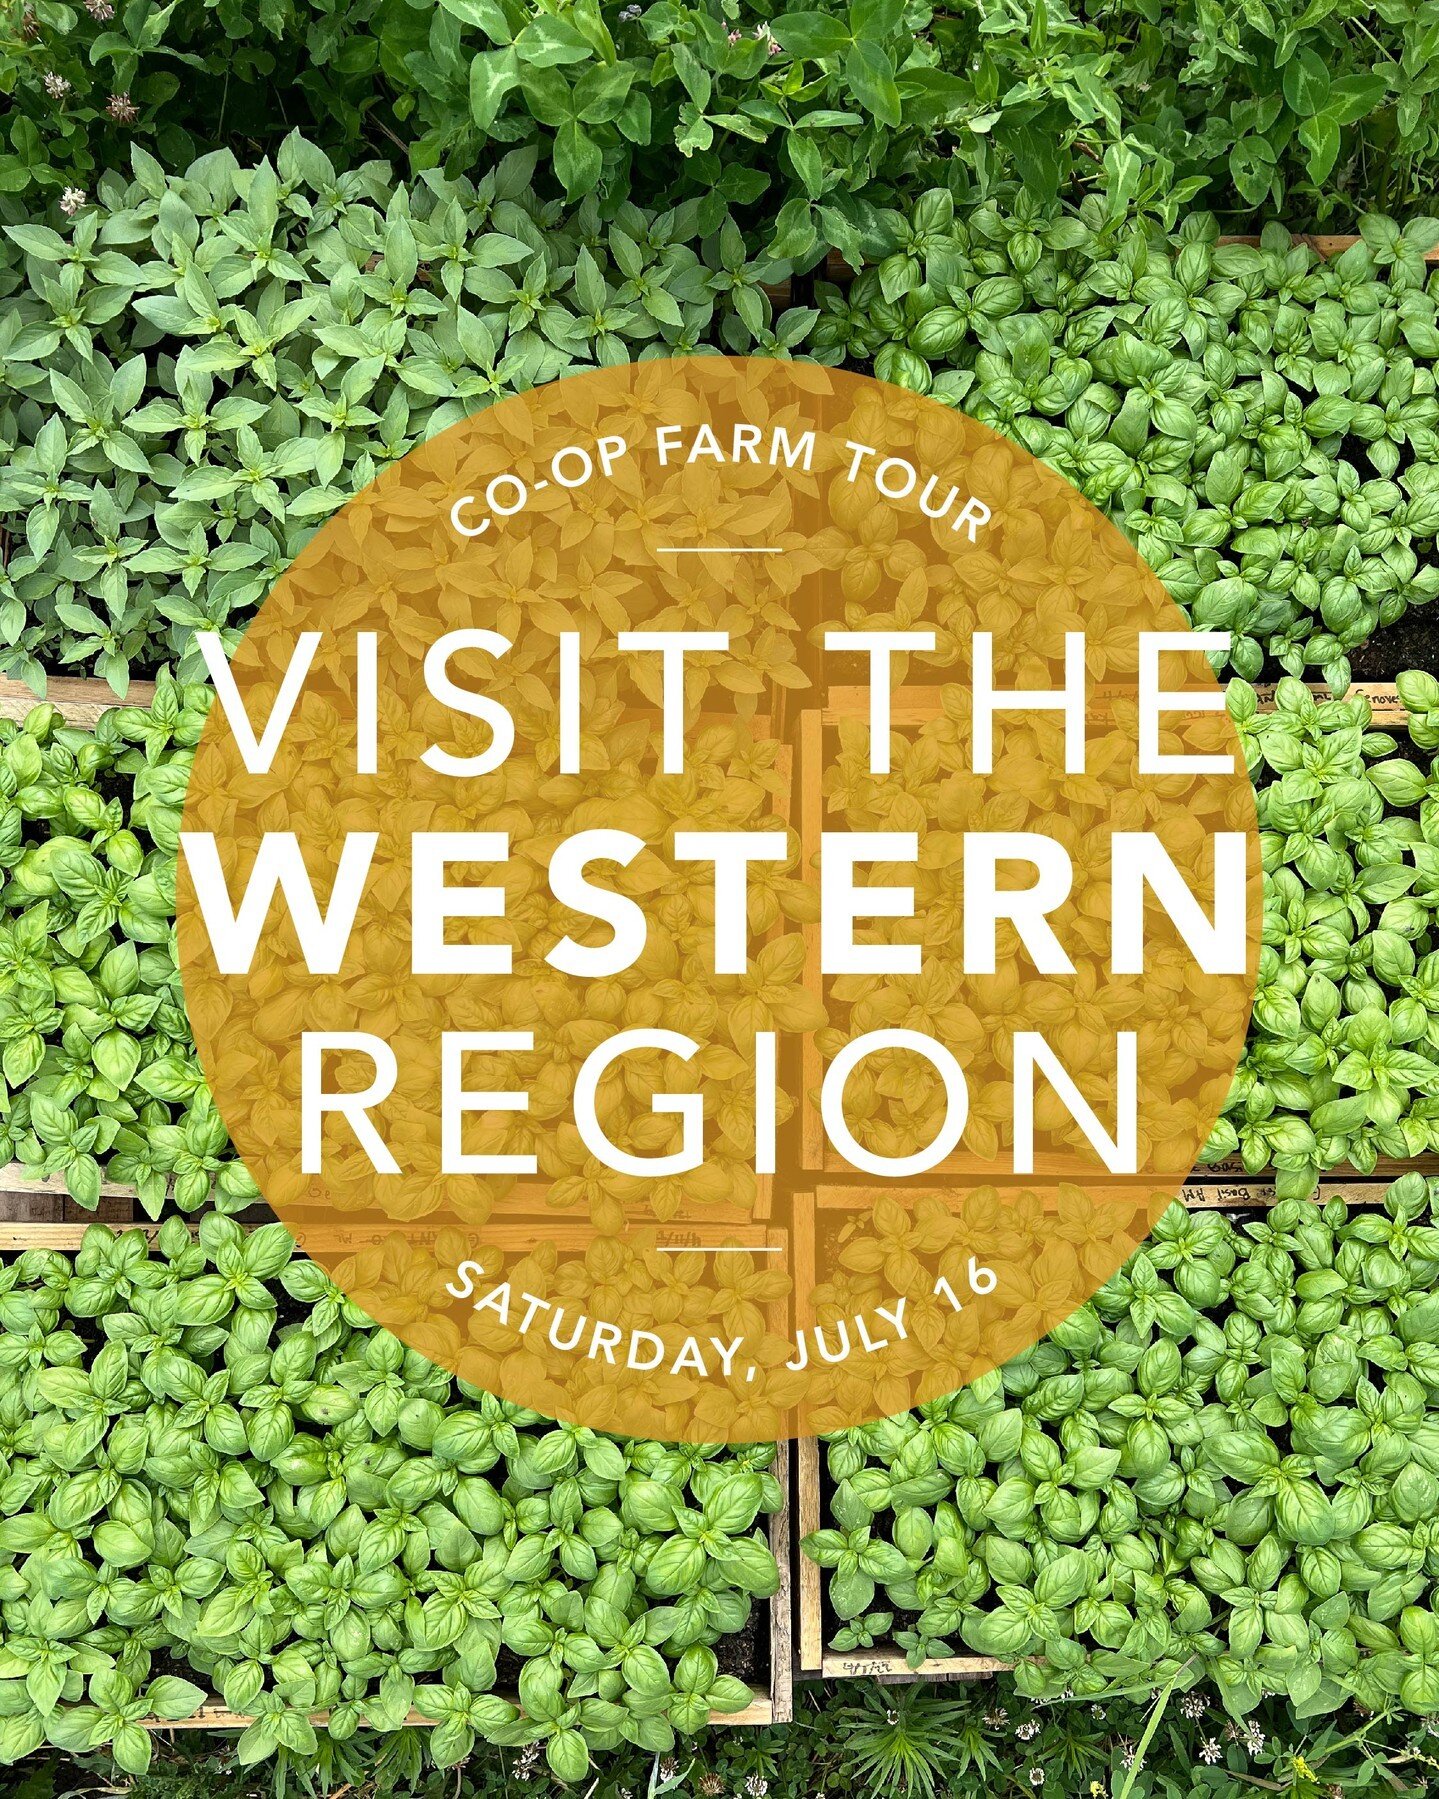 Join us for the Co-op Farm Tour on Saturday, July 16 from 10 am - 4 pm! 🌻 It's a free event that's open to all. Choose your own adventure as you pick from 21 farms to visit in MN and western WI.

To the west of the Twin Cities you'll find farms like